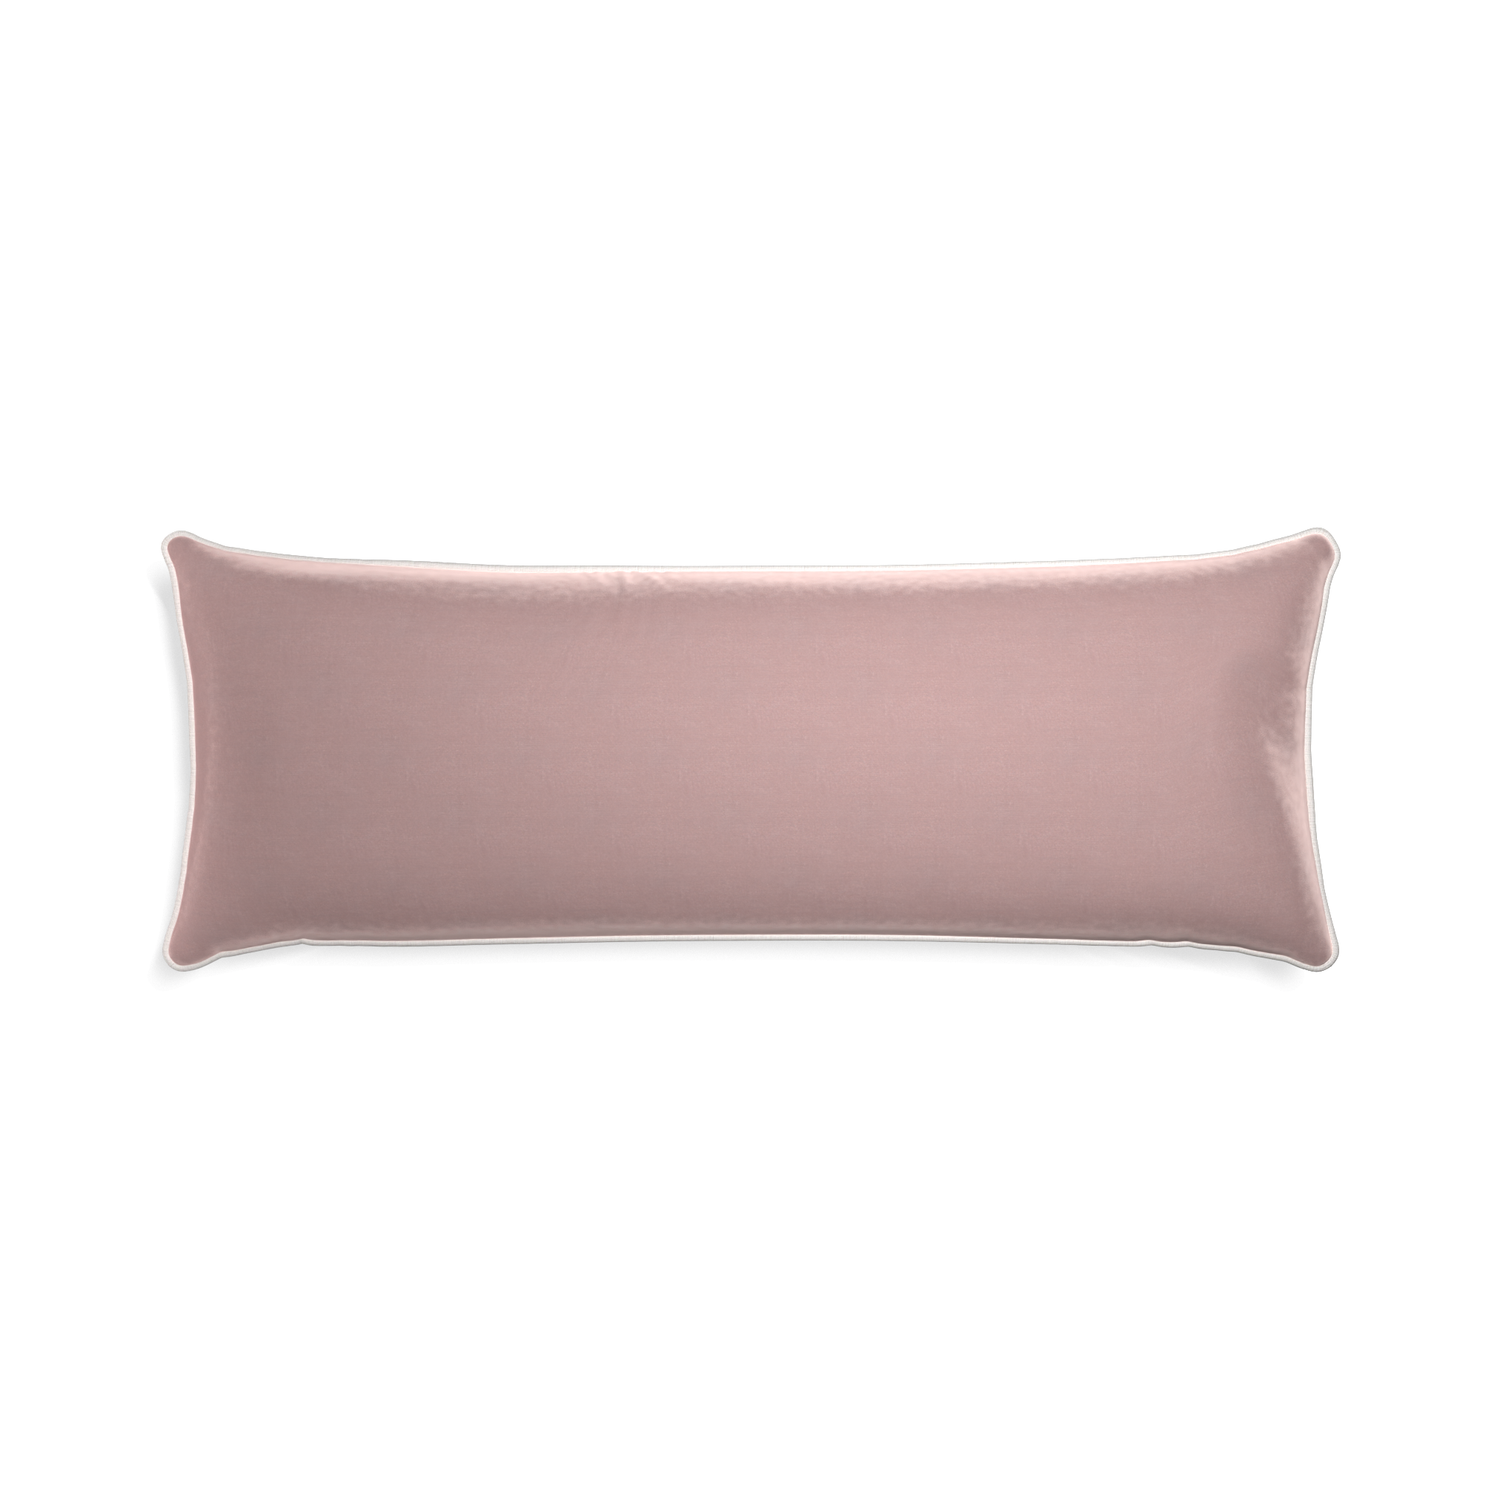 rectangle mauve velvet pillow with white piping